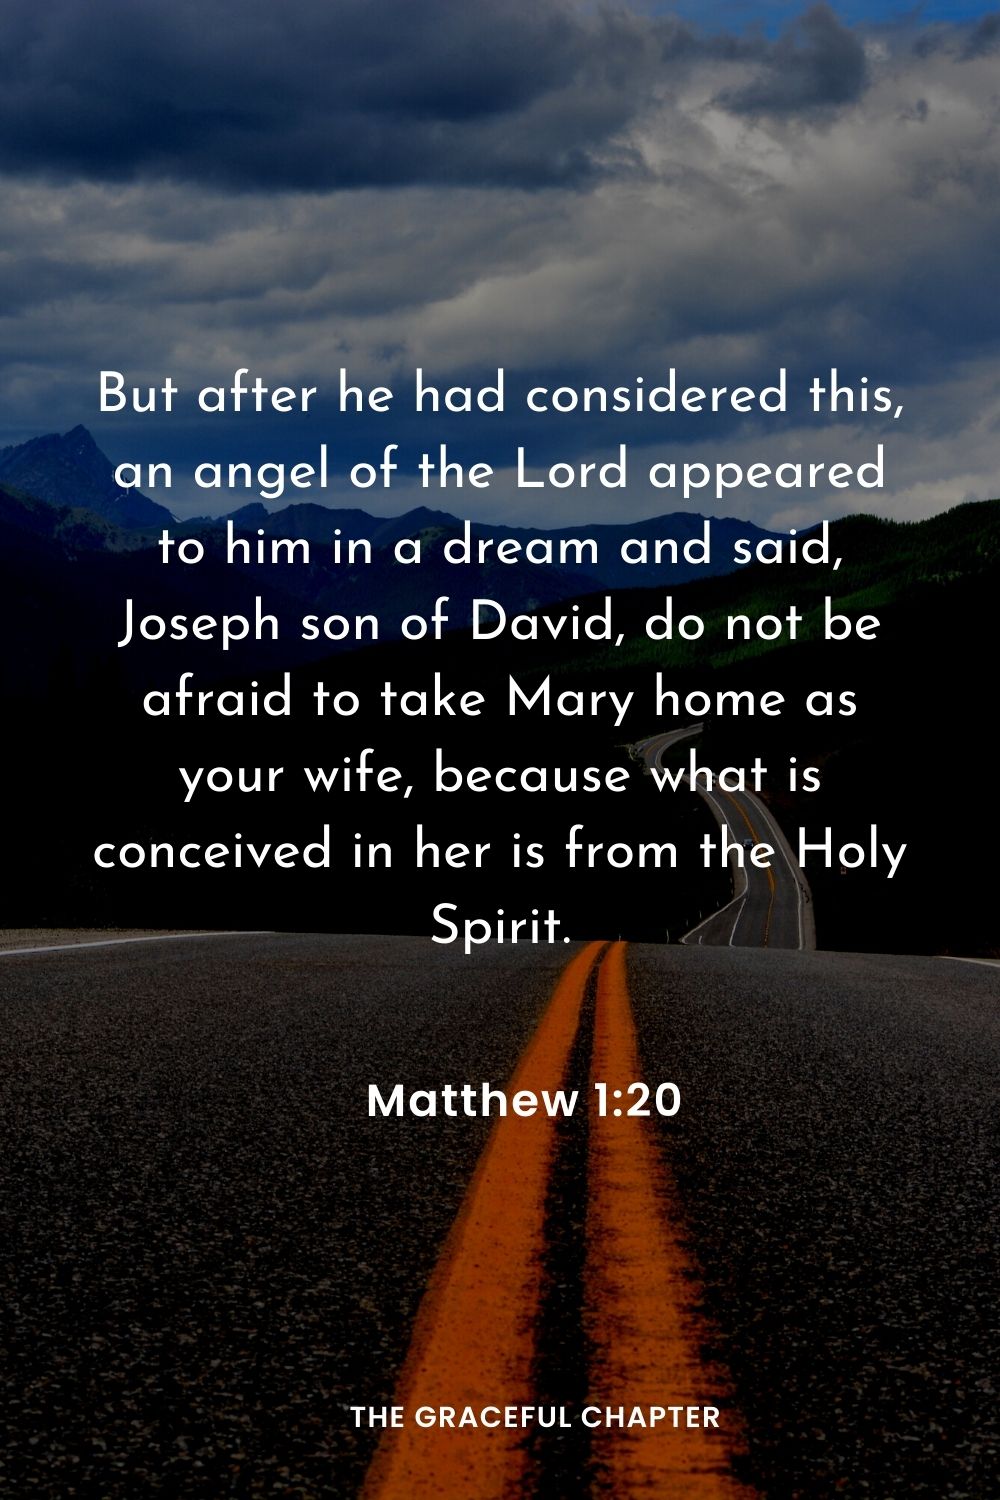 But after he had considered this, an angel of the Lord appeared to him in a dream and said, Joseph son of David, do not be afraid to take Mary home as your wife, because what is conceived in her is from the Holy Spirit.